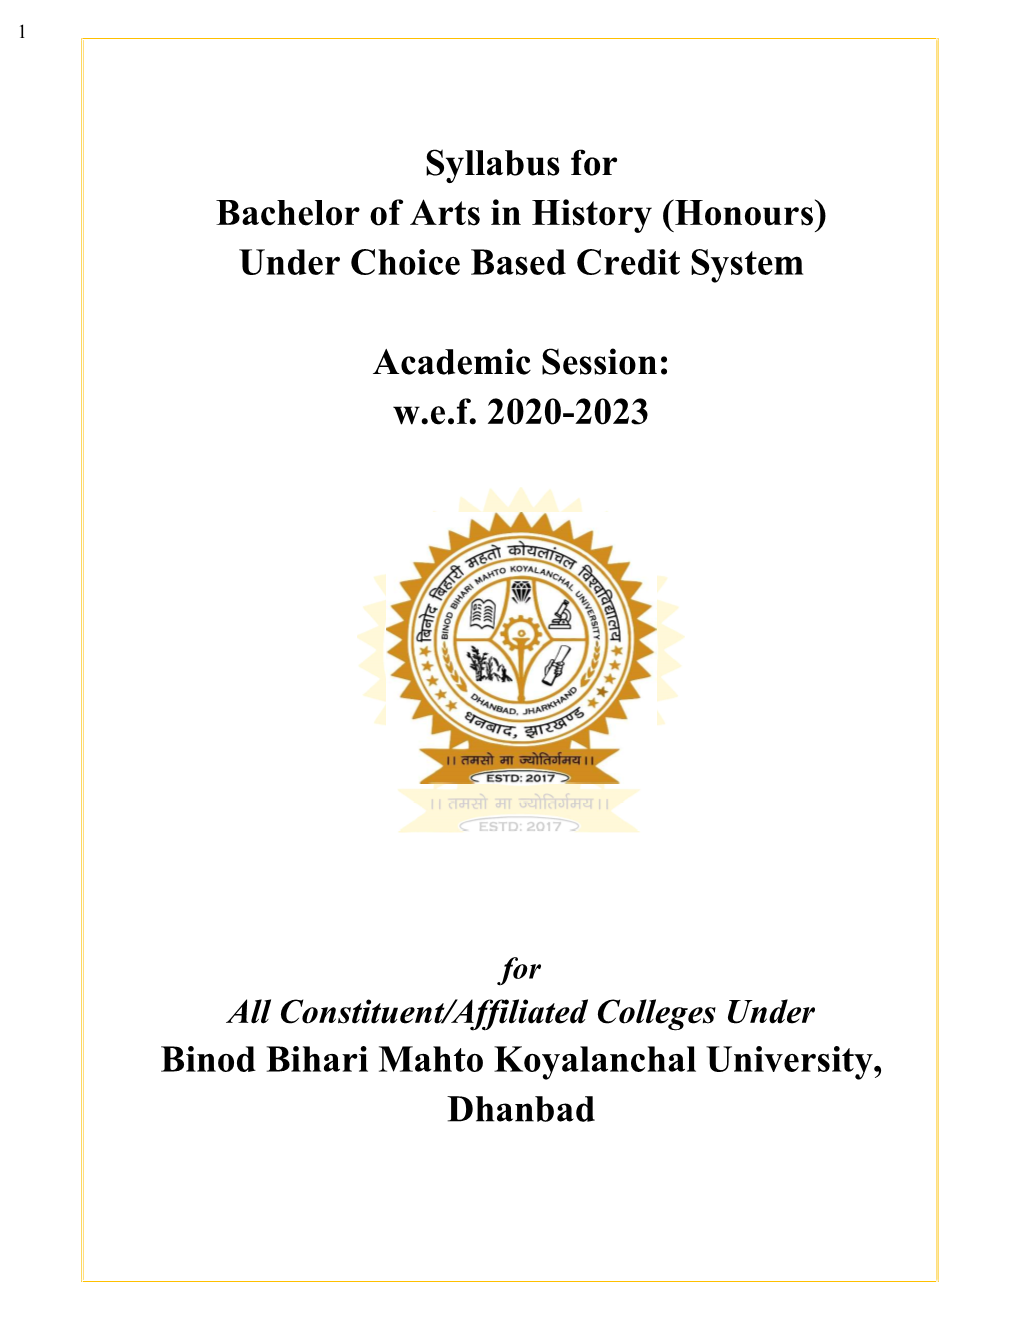 Syllabus for Bachelor of Arts in History (Honours) Under Choice Based Credit System